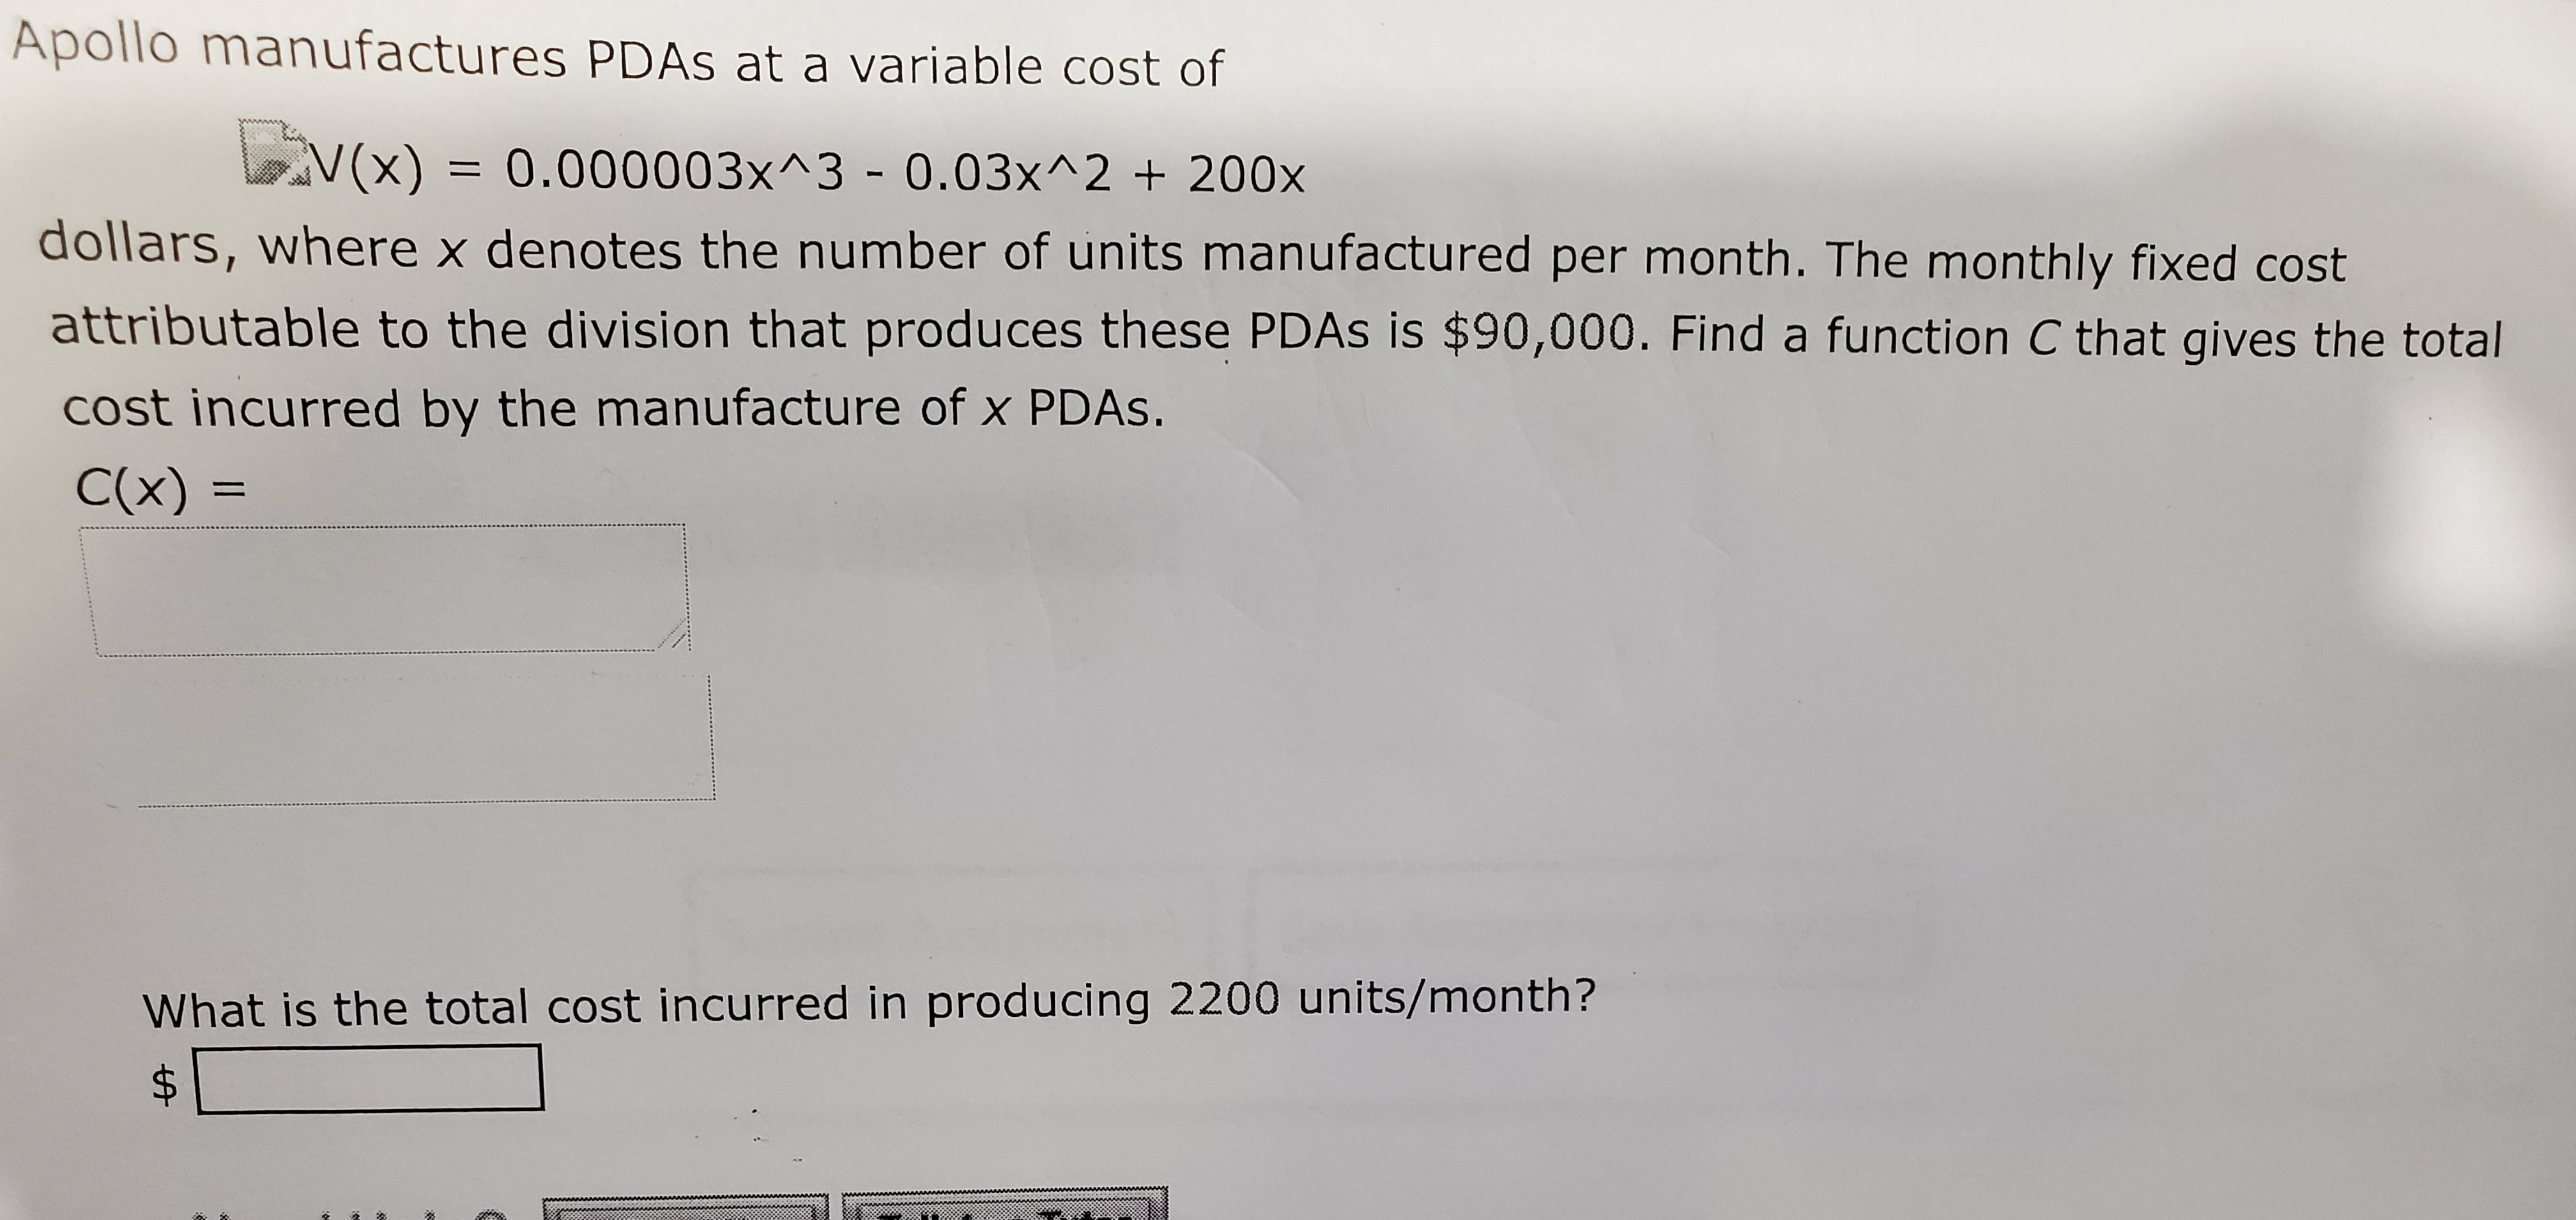 Apollo manufactures PDAS at a variable cost of
V(x) = 0.000003x^3 - 0.03x^2 + 200x
dollars, where x denotes the number of units manufactured per month. The monthly fixed cost
attributable to the division that produces these PDAS is $90,000. Find a function C that gives the total
cost incurred by the manufacture of x PDAS.
C(x) =
What is the total cost incurred in producing 2200 units/month?
%24
